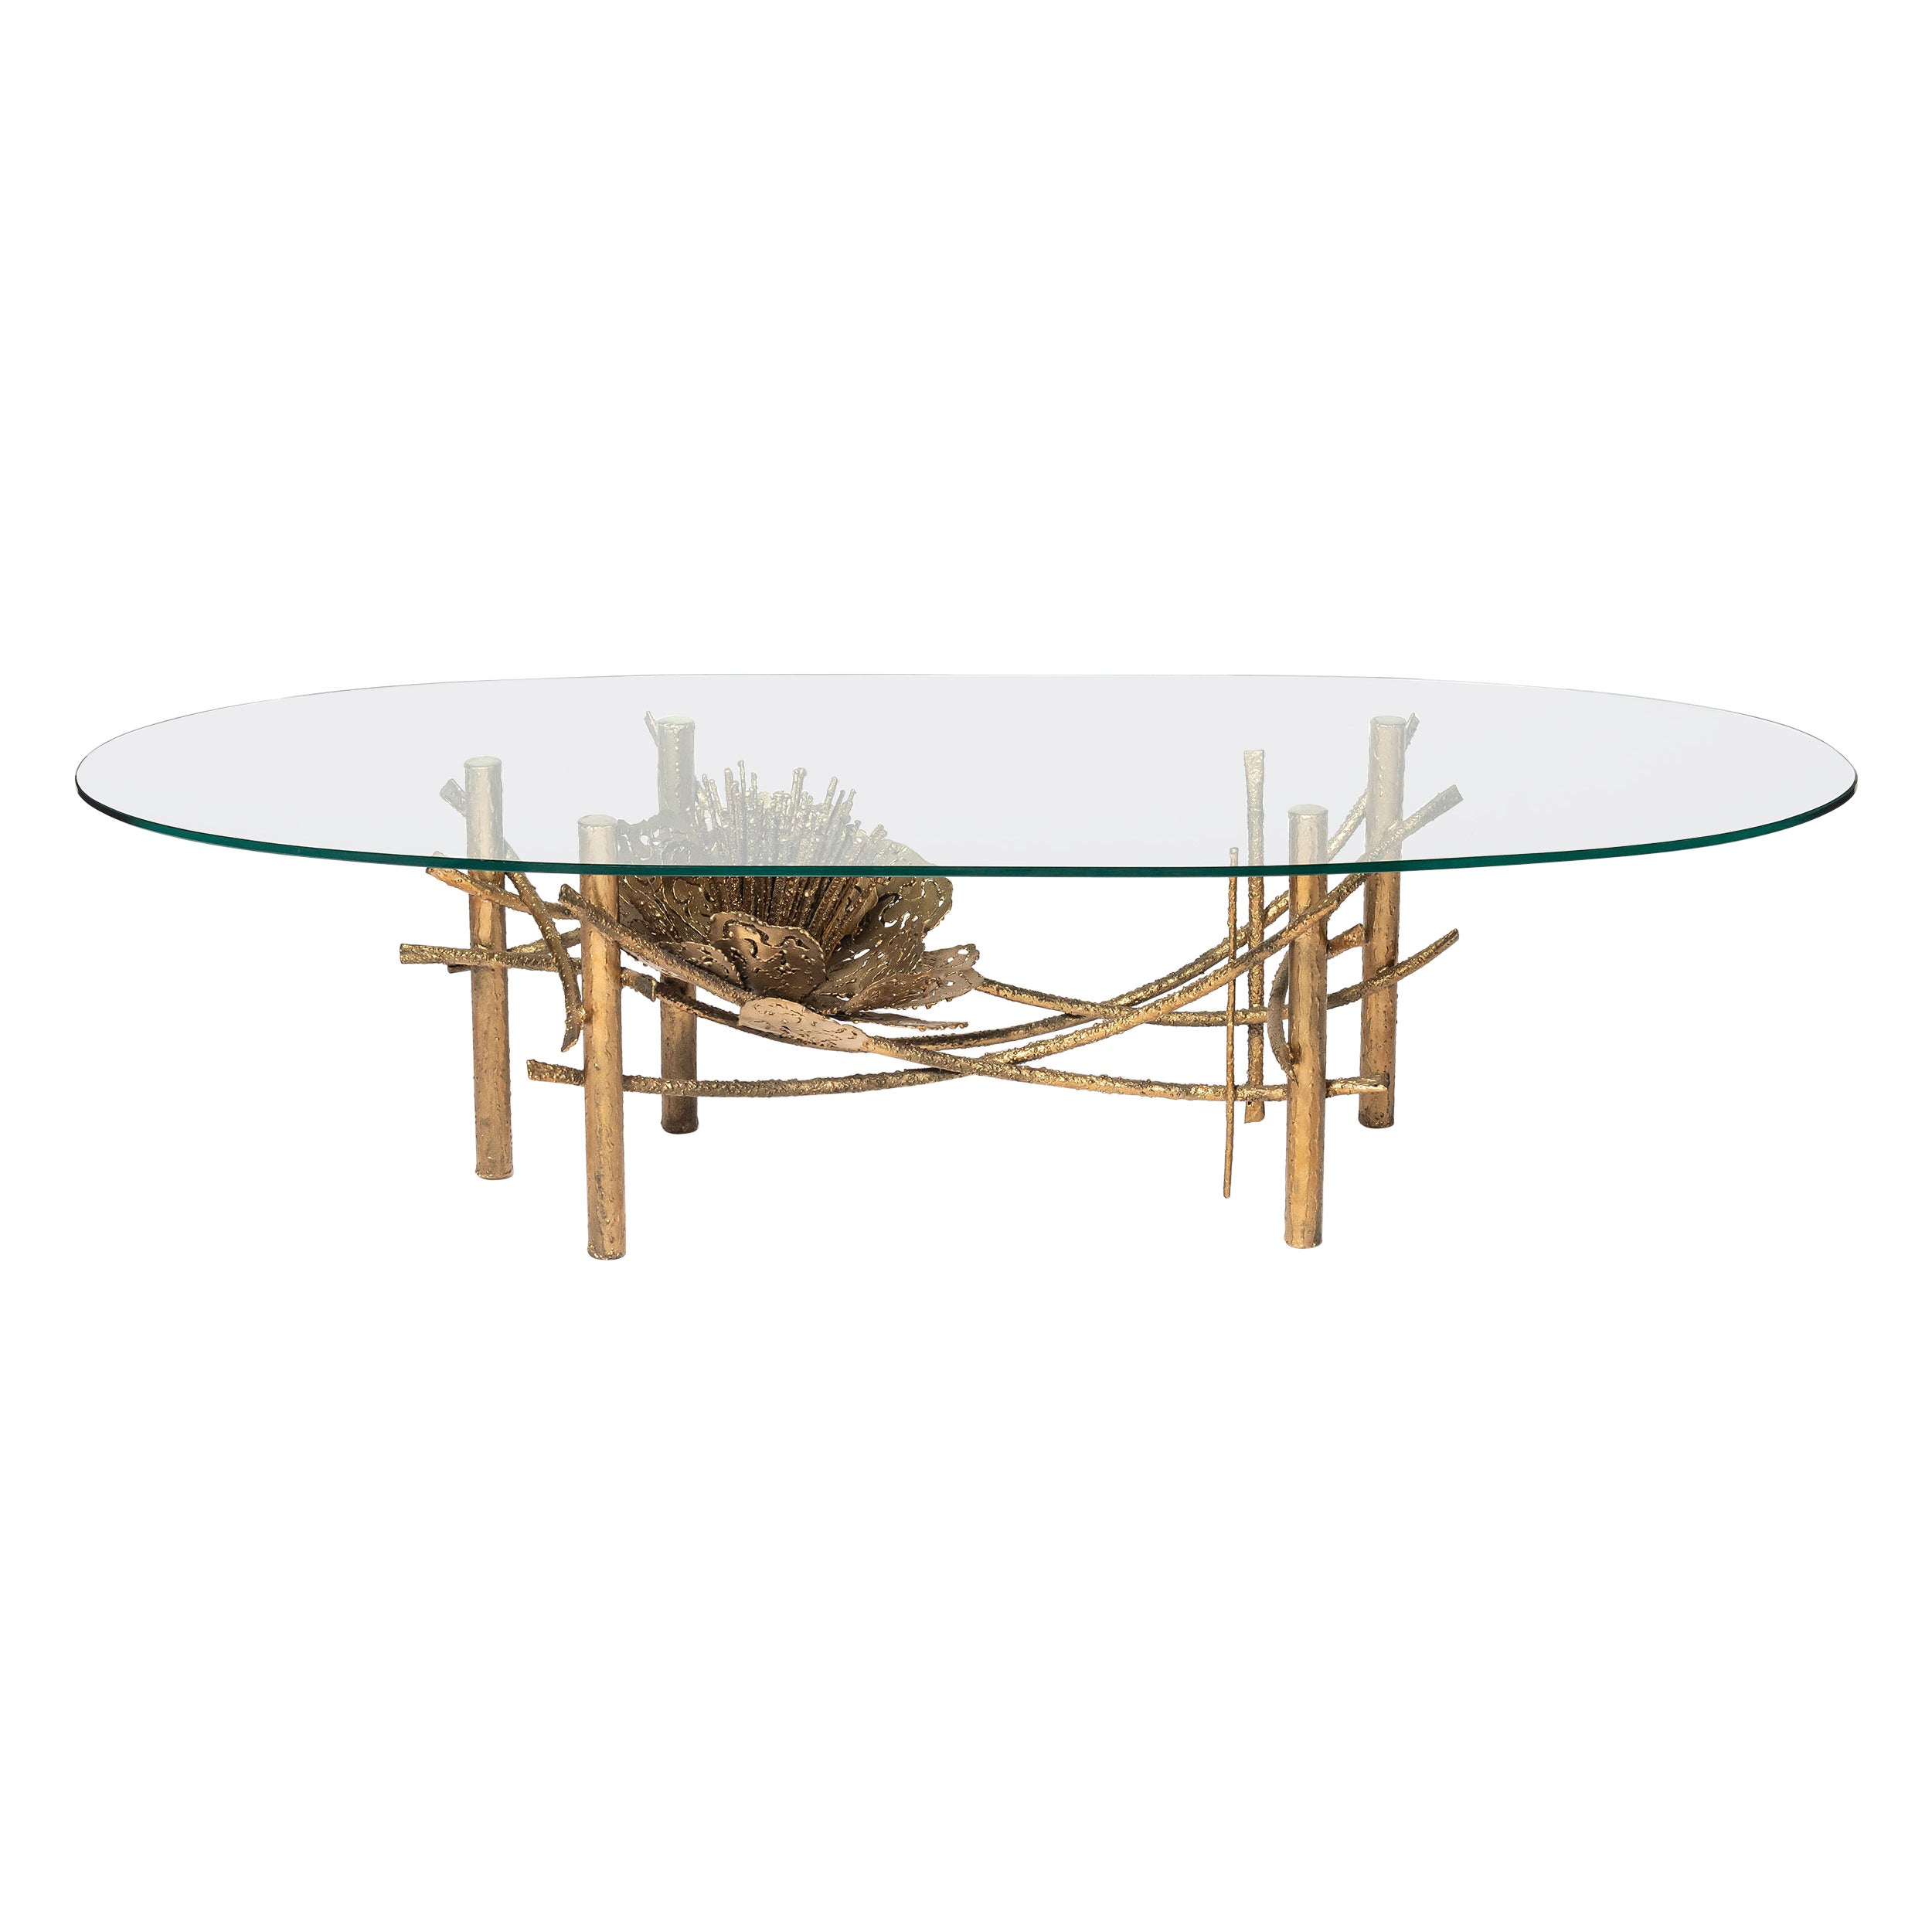 Painted Iron and Glass Low Table Lotus Blossom by Curtis Jere, USA, C. 1960 For Sale